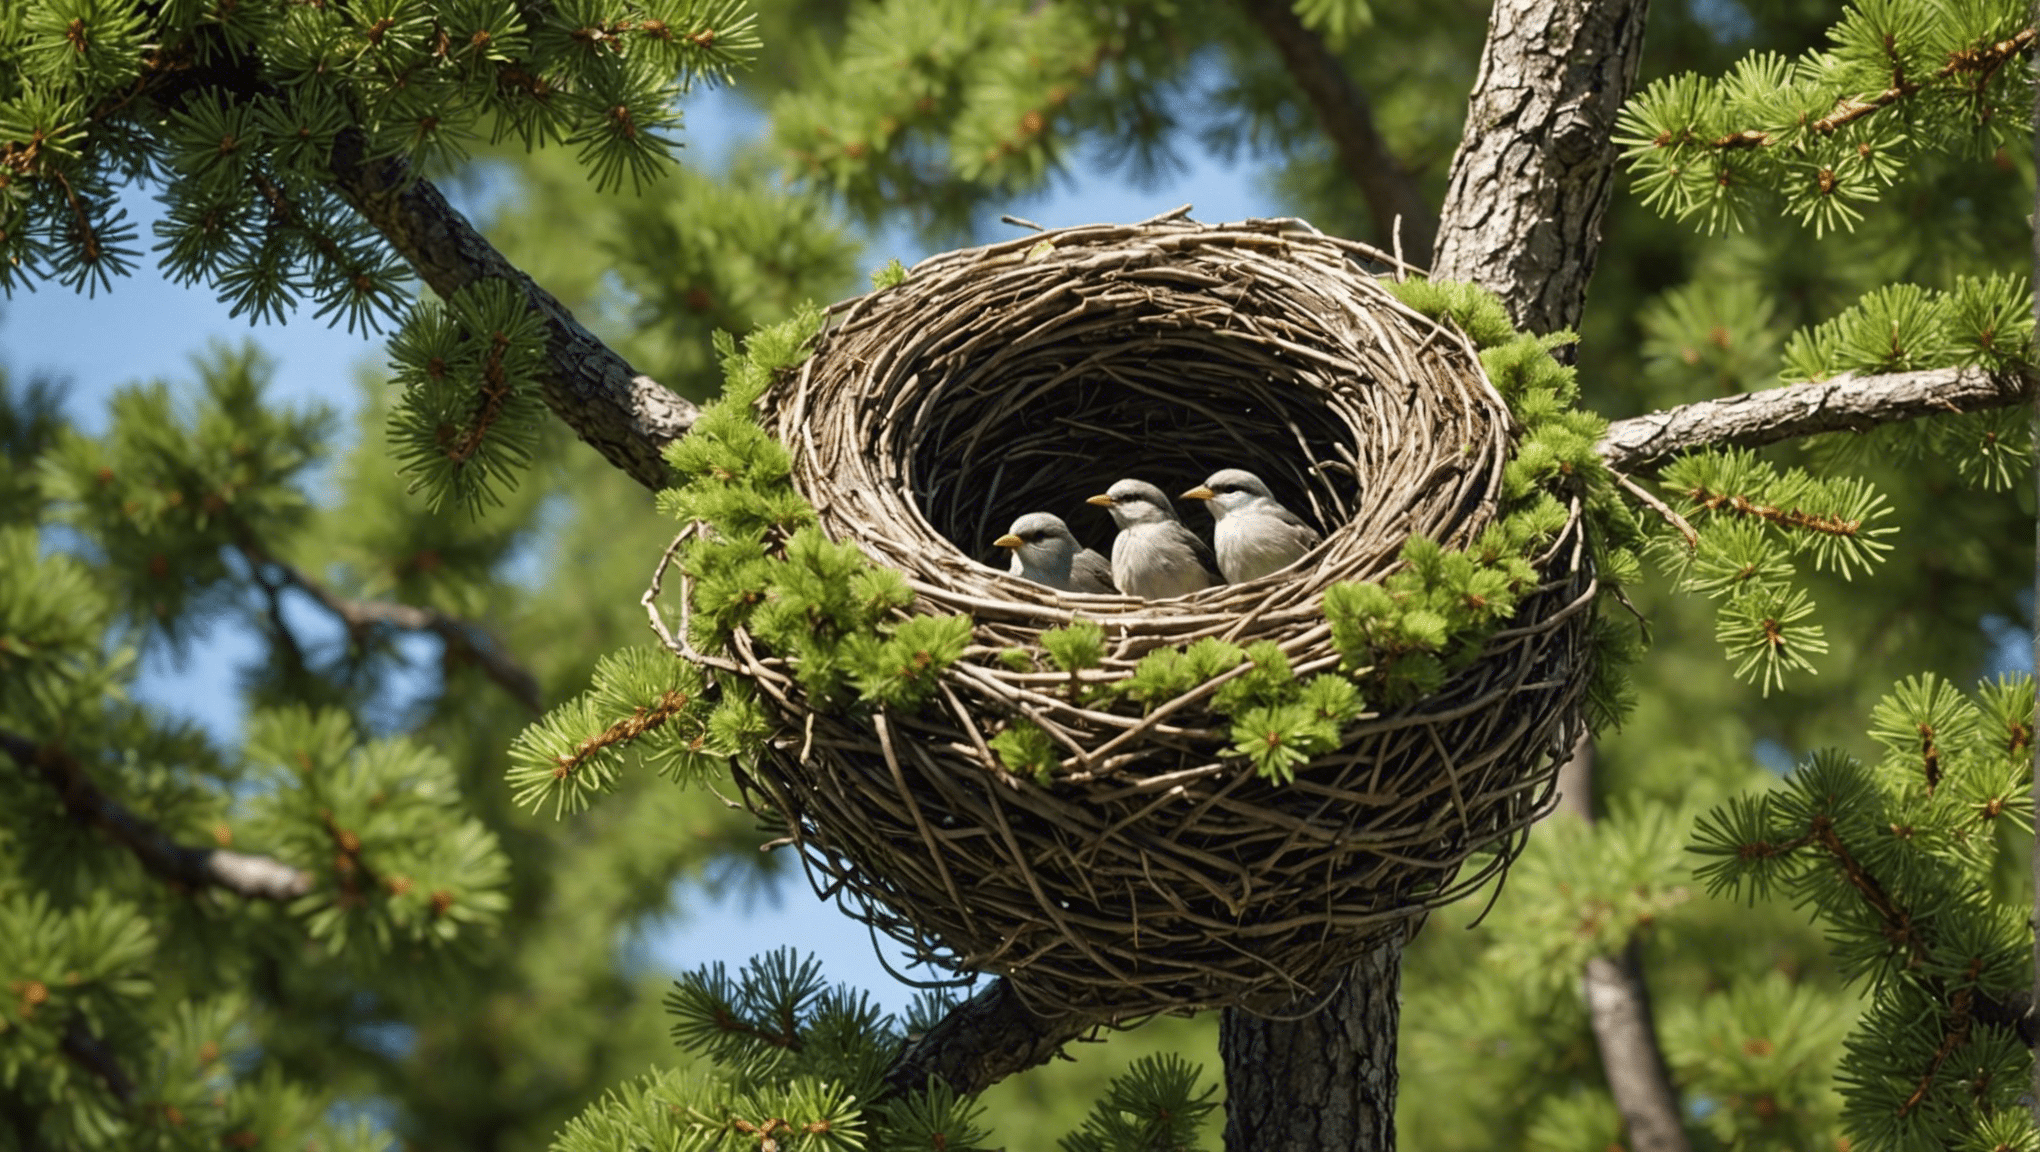 discover what makes the birds nest spruce so unique and appealing in this informative article. learn about its distinctive features and characteristics that set it apart from other trees.